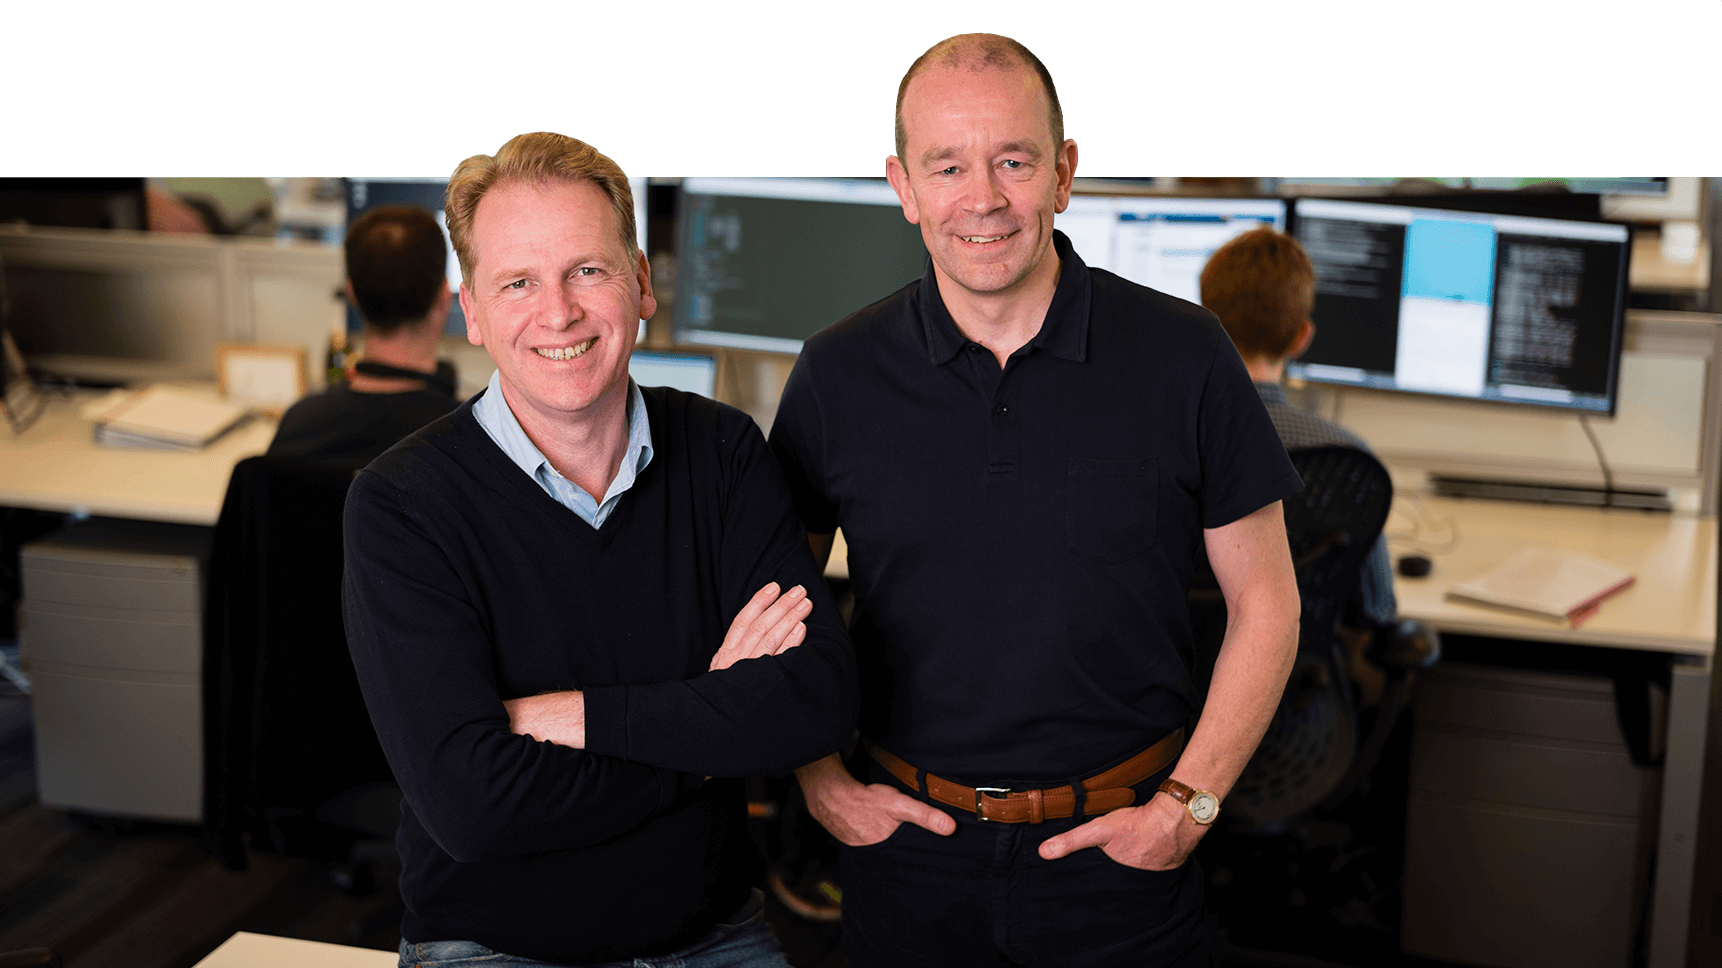 Graphcore's co-founders Nigel Toon (CEO) & Simon Knowles (CTO)